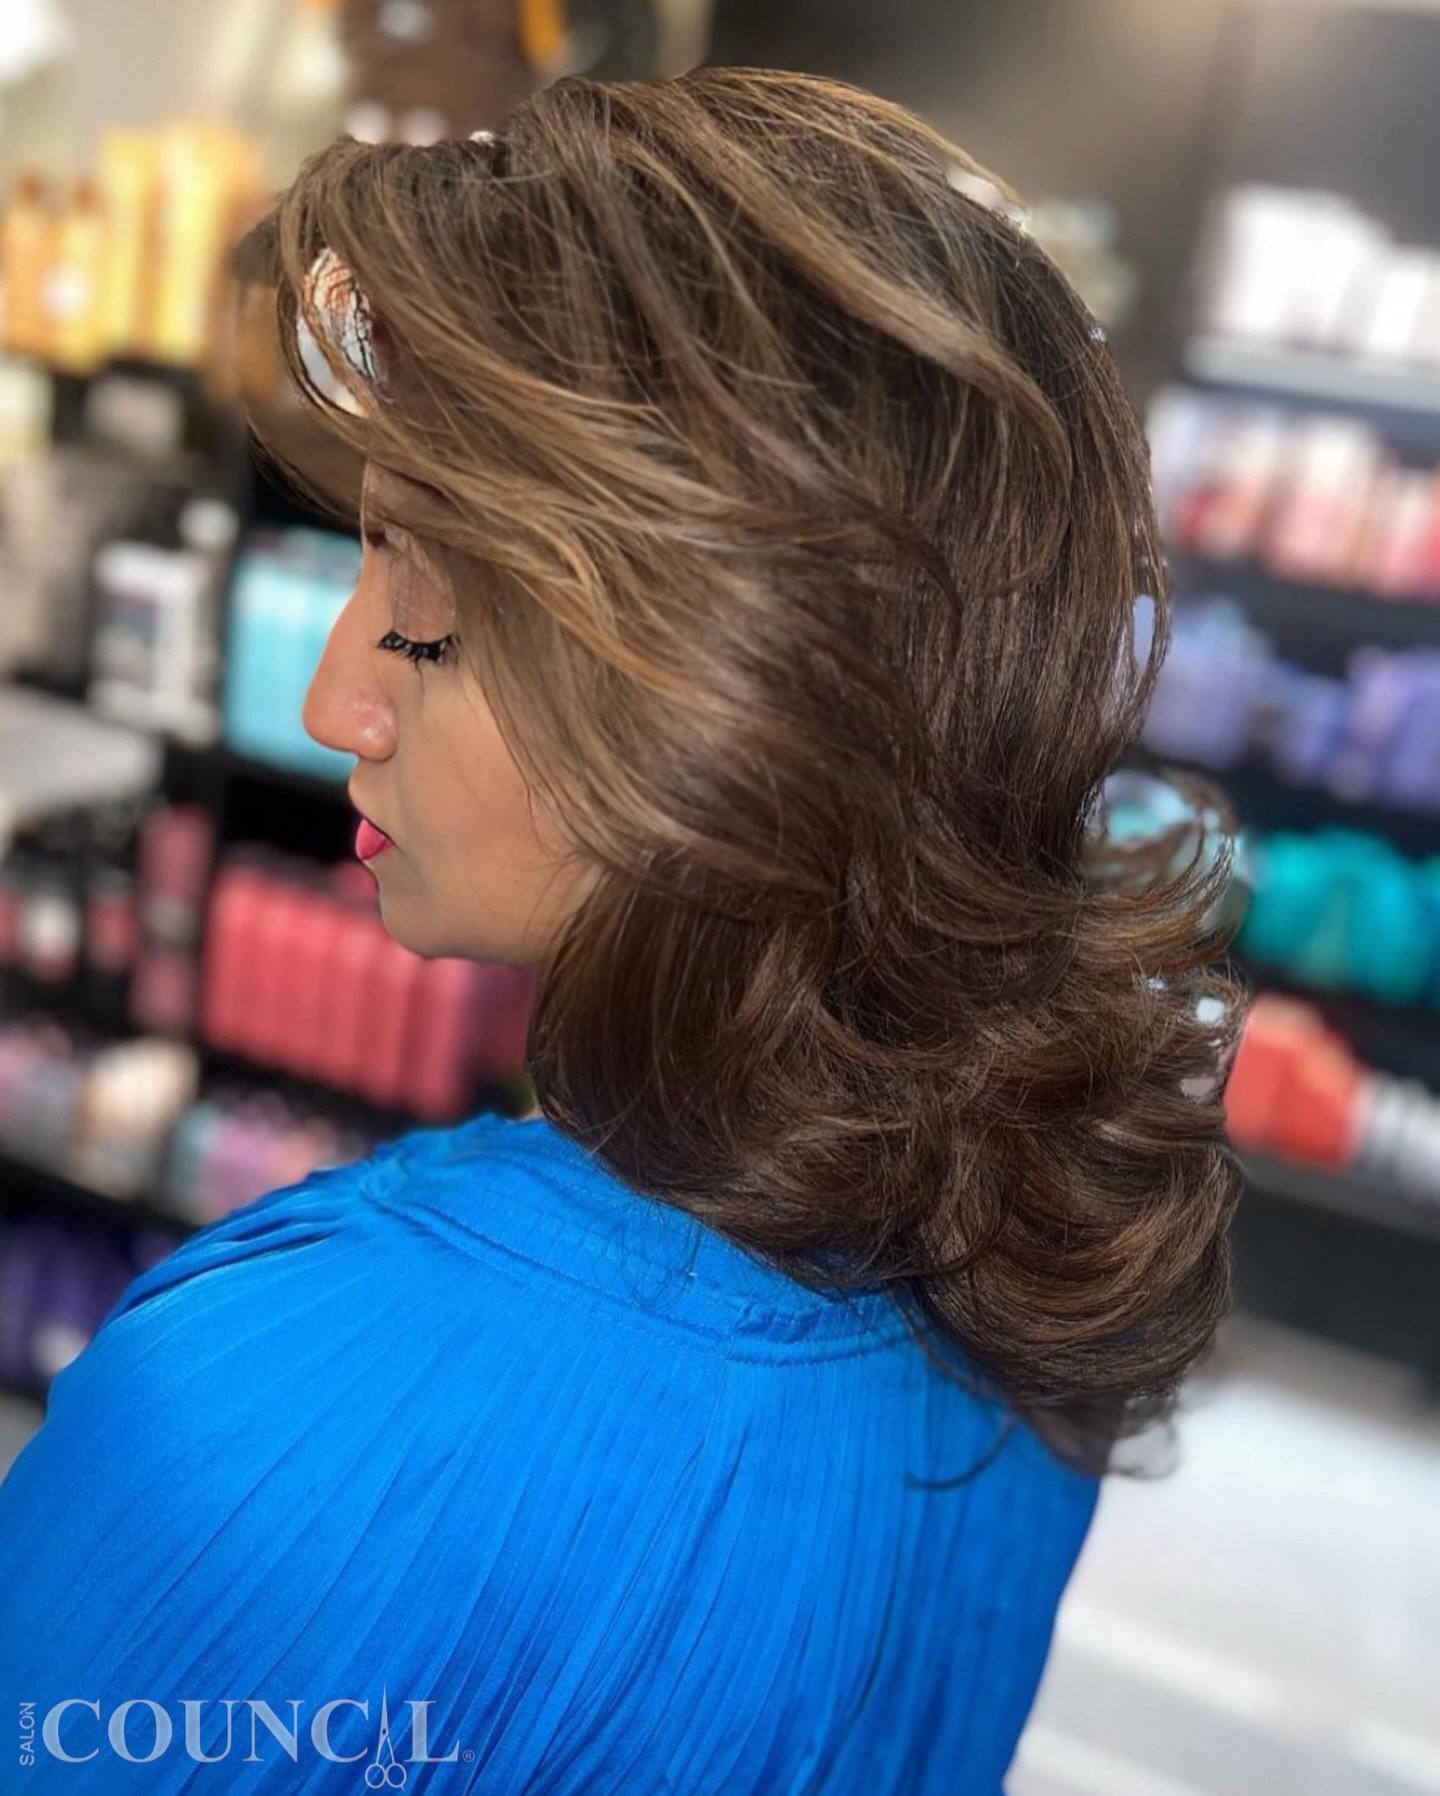 🎉#blowout 
Elevate your style with a luxurious shampoo, nourishing conditioner, and a volume-packed blowout! 
💫Ready to take on the world with flawless hair! #BlowoutGlam #HairGoals

WASH &bull; VOLUME BLOWDRY STYLE 

Hair by GENESIS @genyx16 
@sal